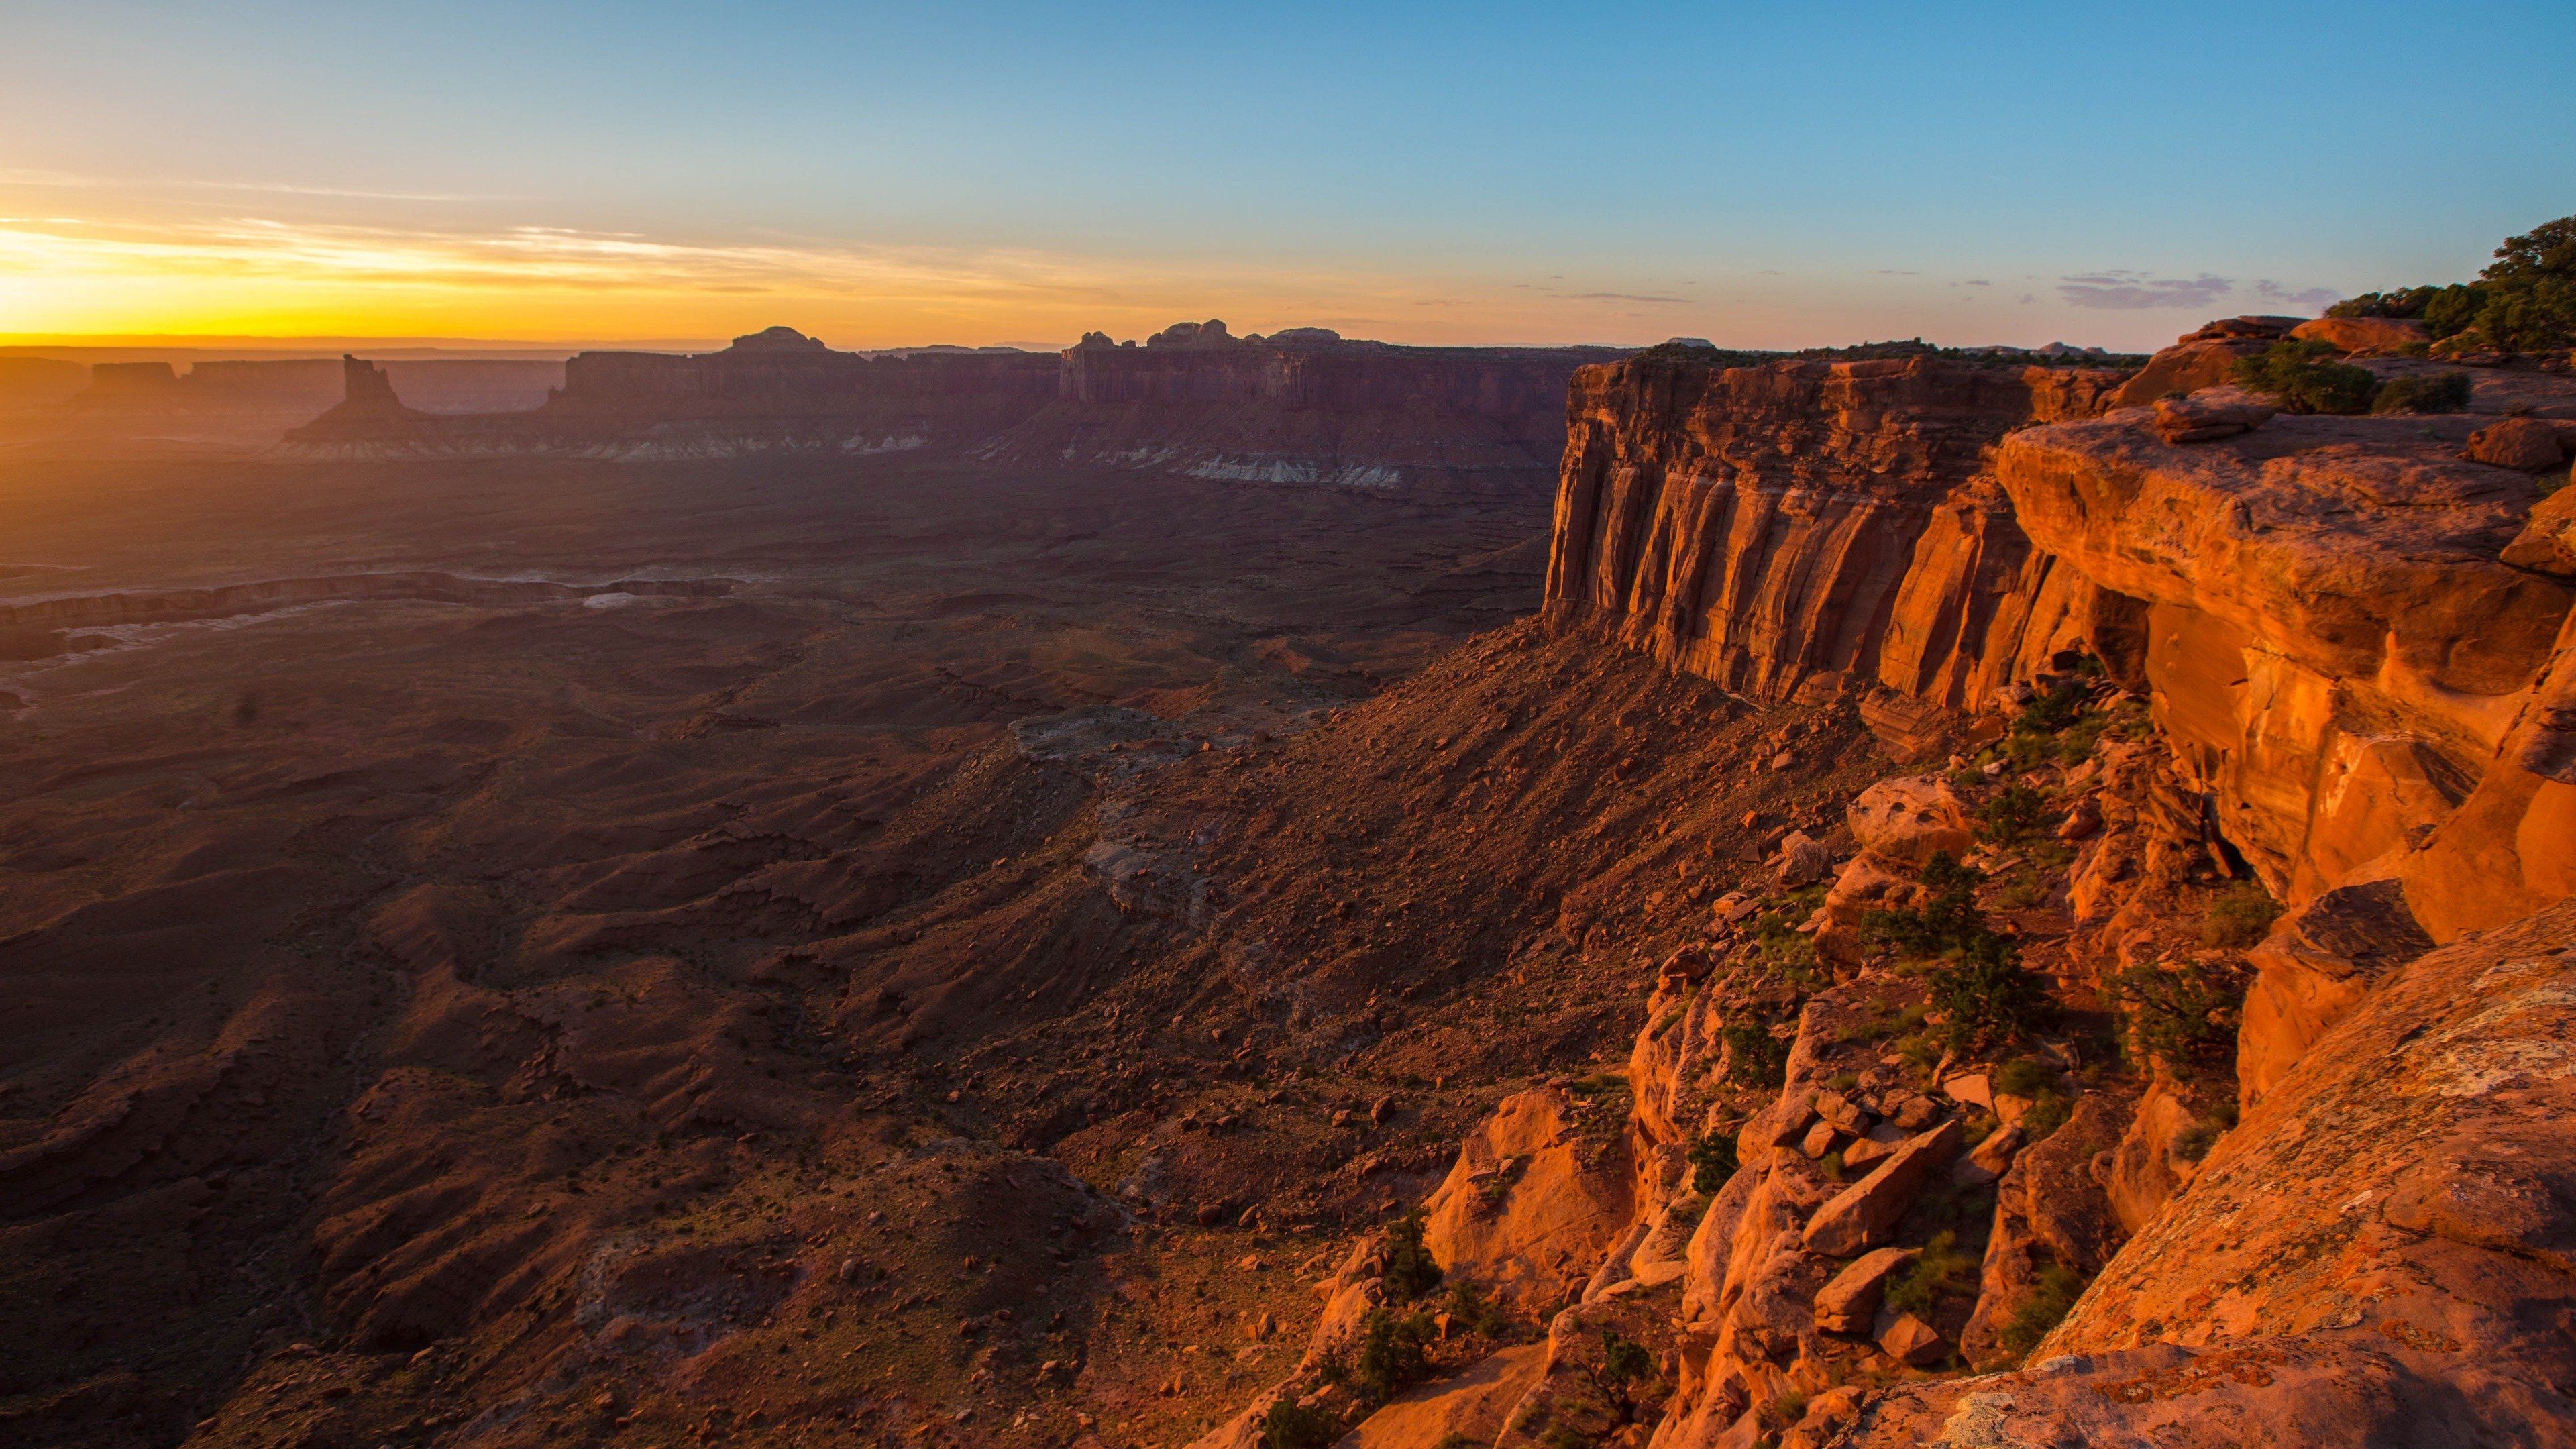 Canyonlands 4K wallpaper for your desktop or mobile screen free and easy to download